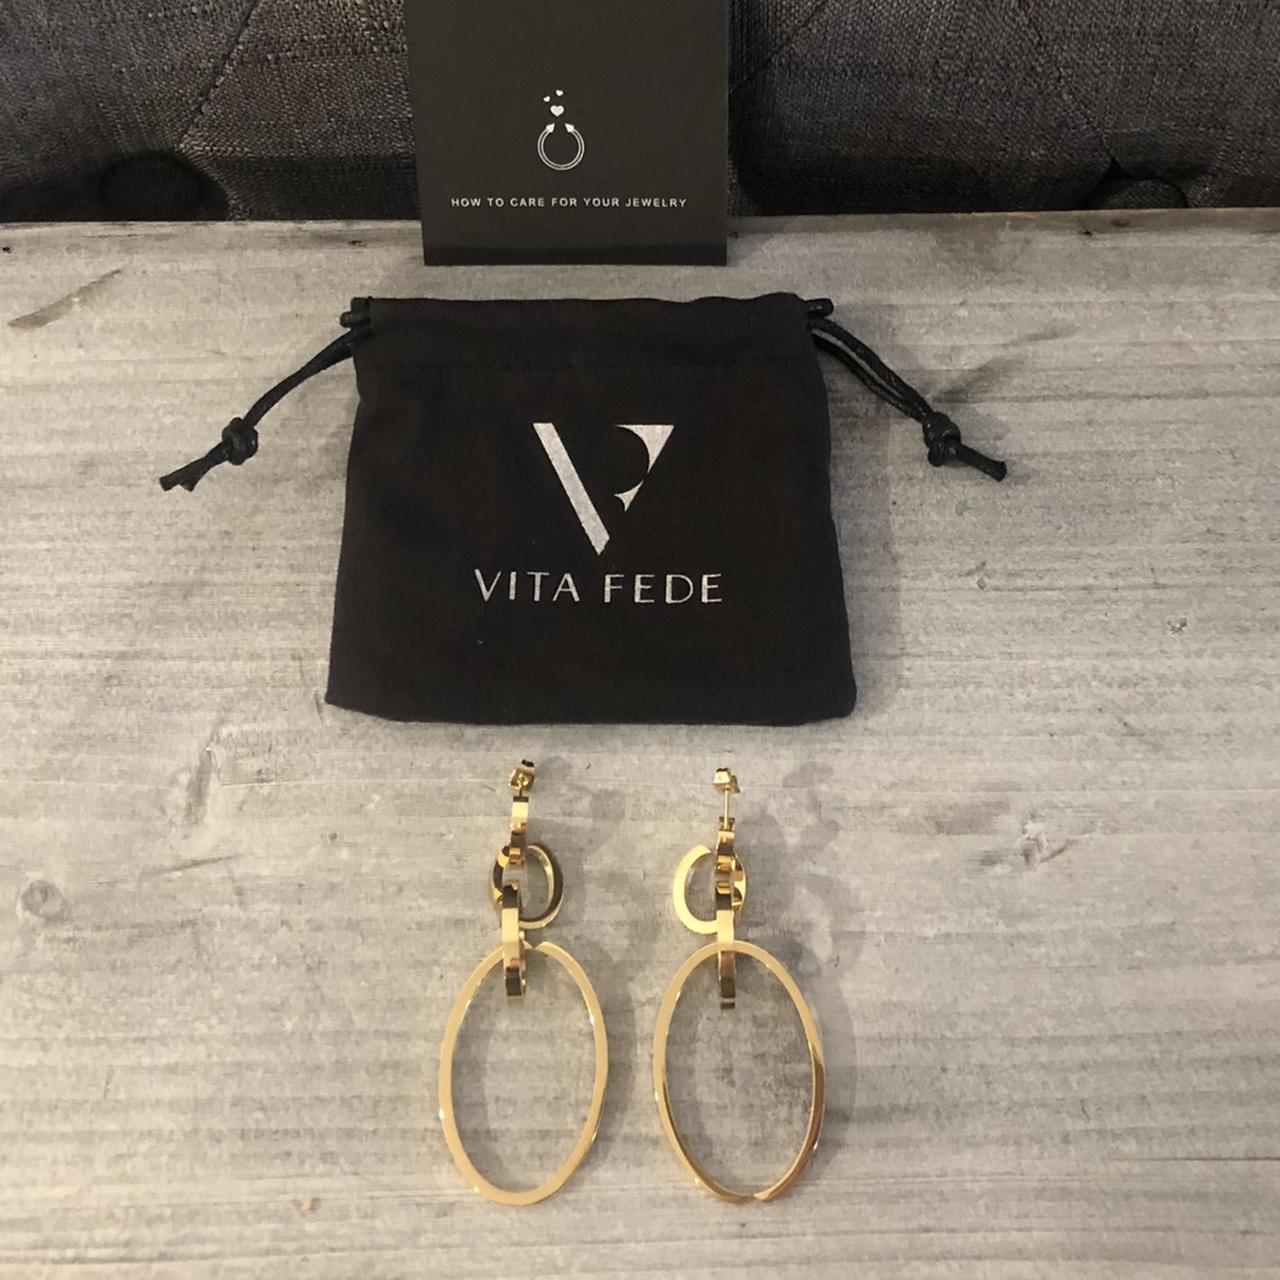 Product Image 1 - These modular earrings from Vita